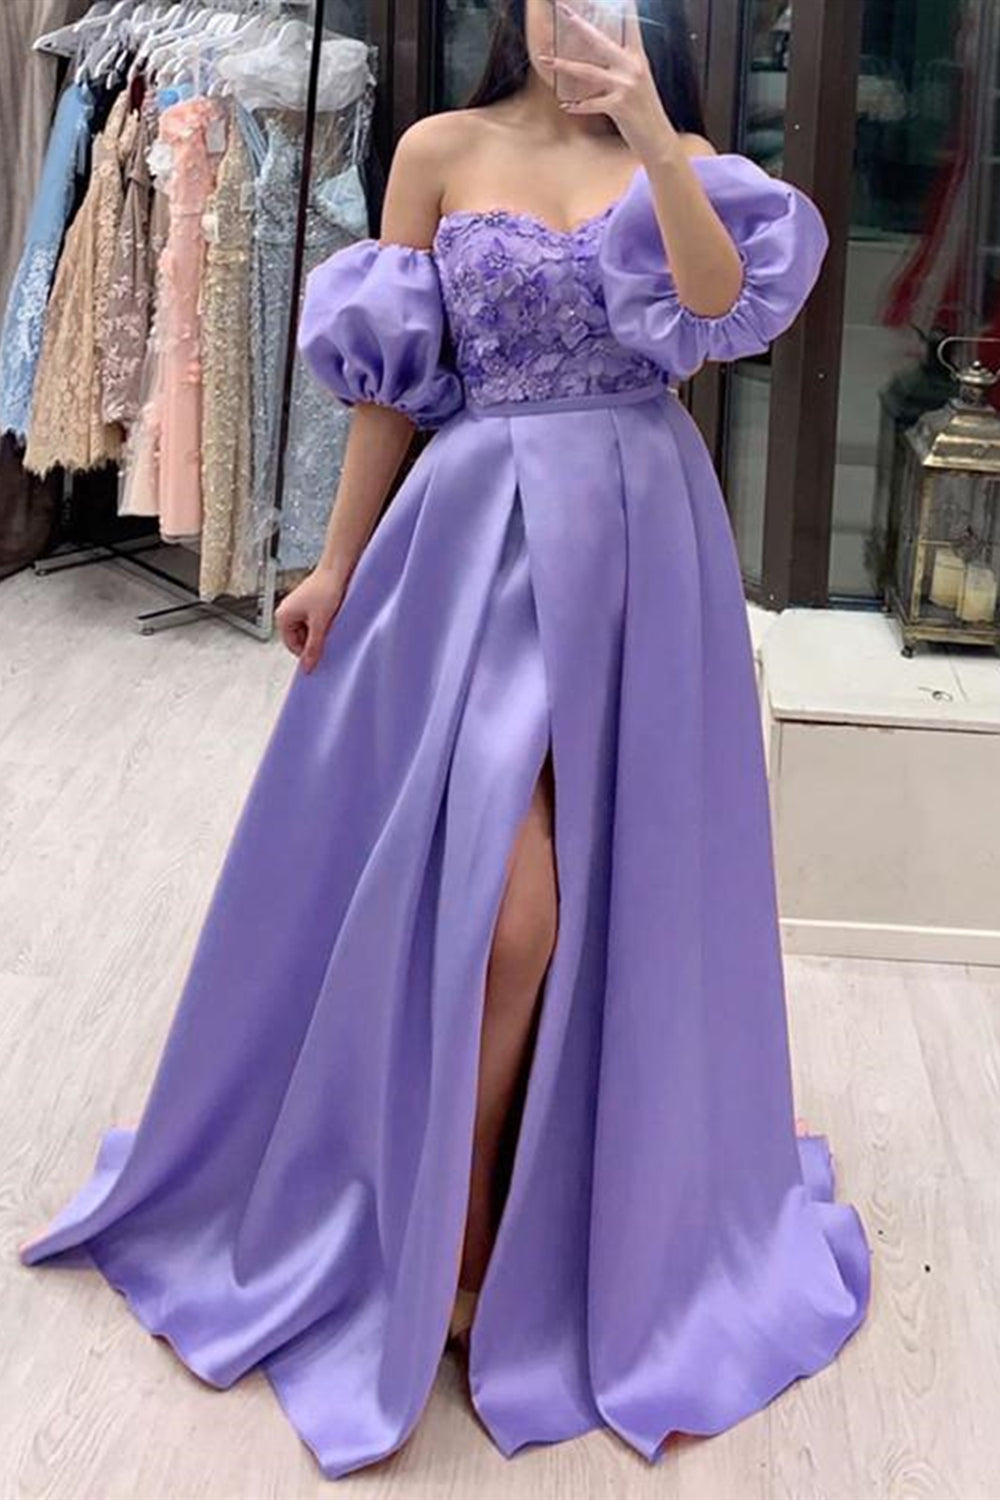 Removable Sleeves Lavender Lace Long Prom Dresses with High Slit, Lavender Lace Formal Dresses, Purple Evening Dresses, EP1650